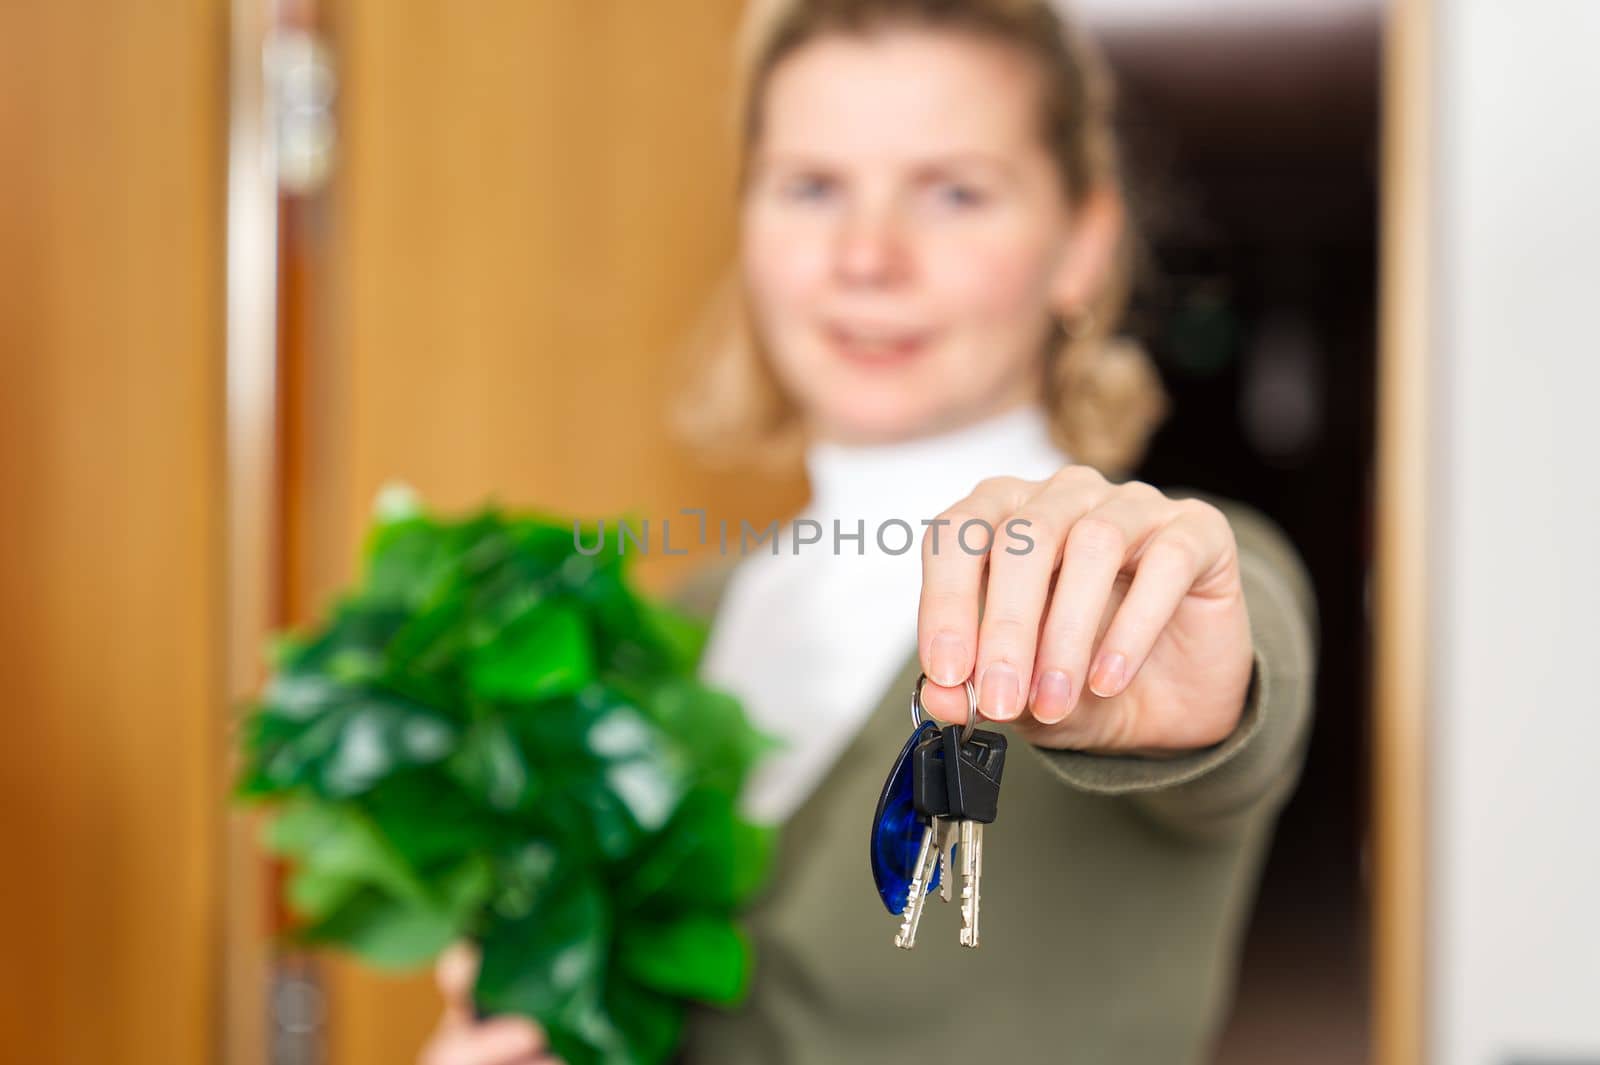 Starting new life. Overjoyed woman hold keys from new apartment or home. new life starts now. Excited woman proud of becoming homeowner first time. loan, mortgage concept